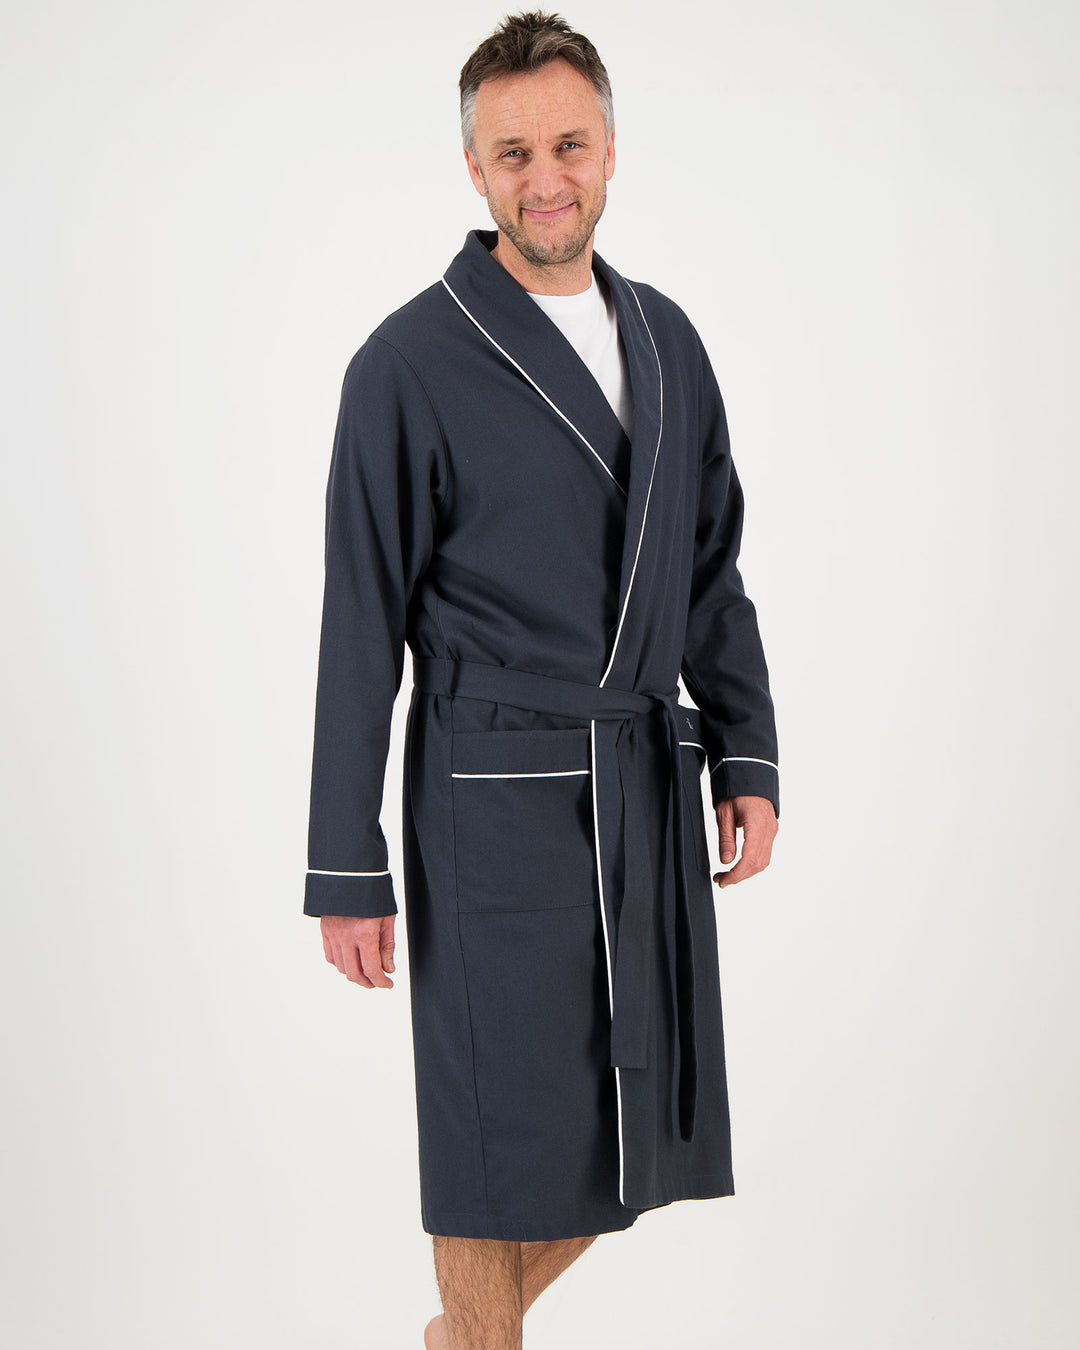 Mens Flannel Gown Charcoal with White Piping Front - Woodstock Laundry SA